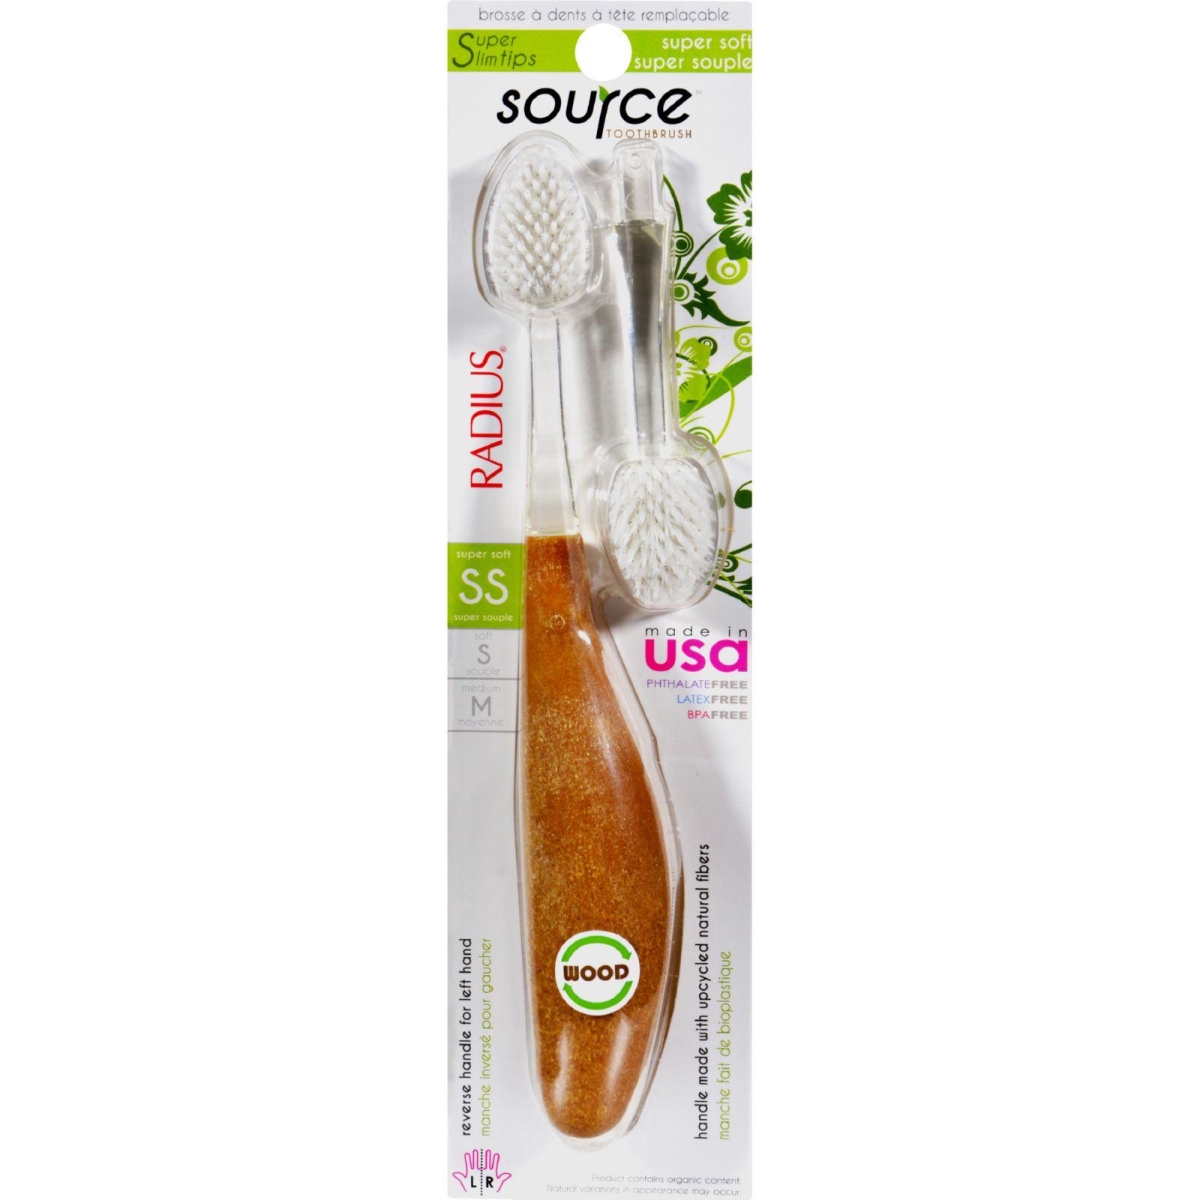 Hg1503663 Source Super Soft Toothbrush - 6 Count